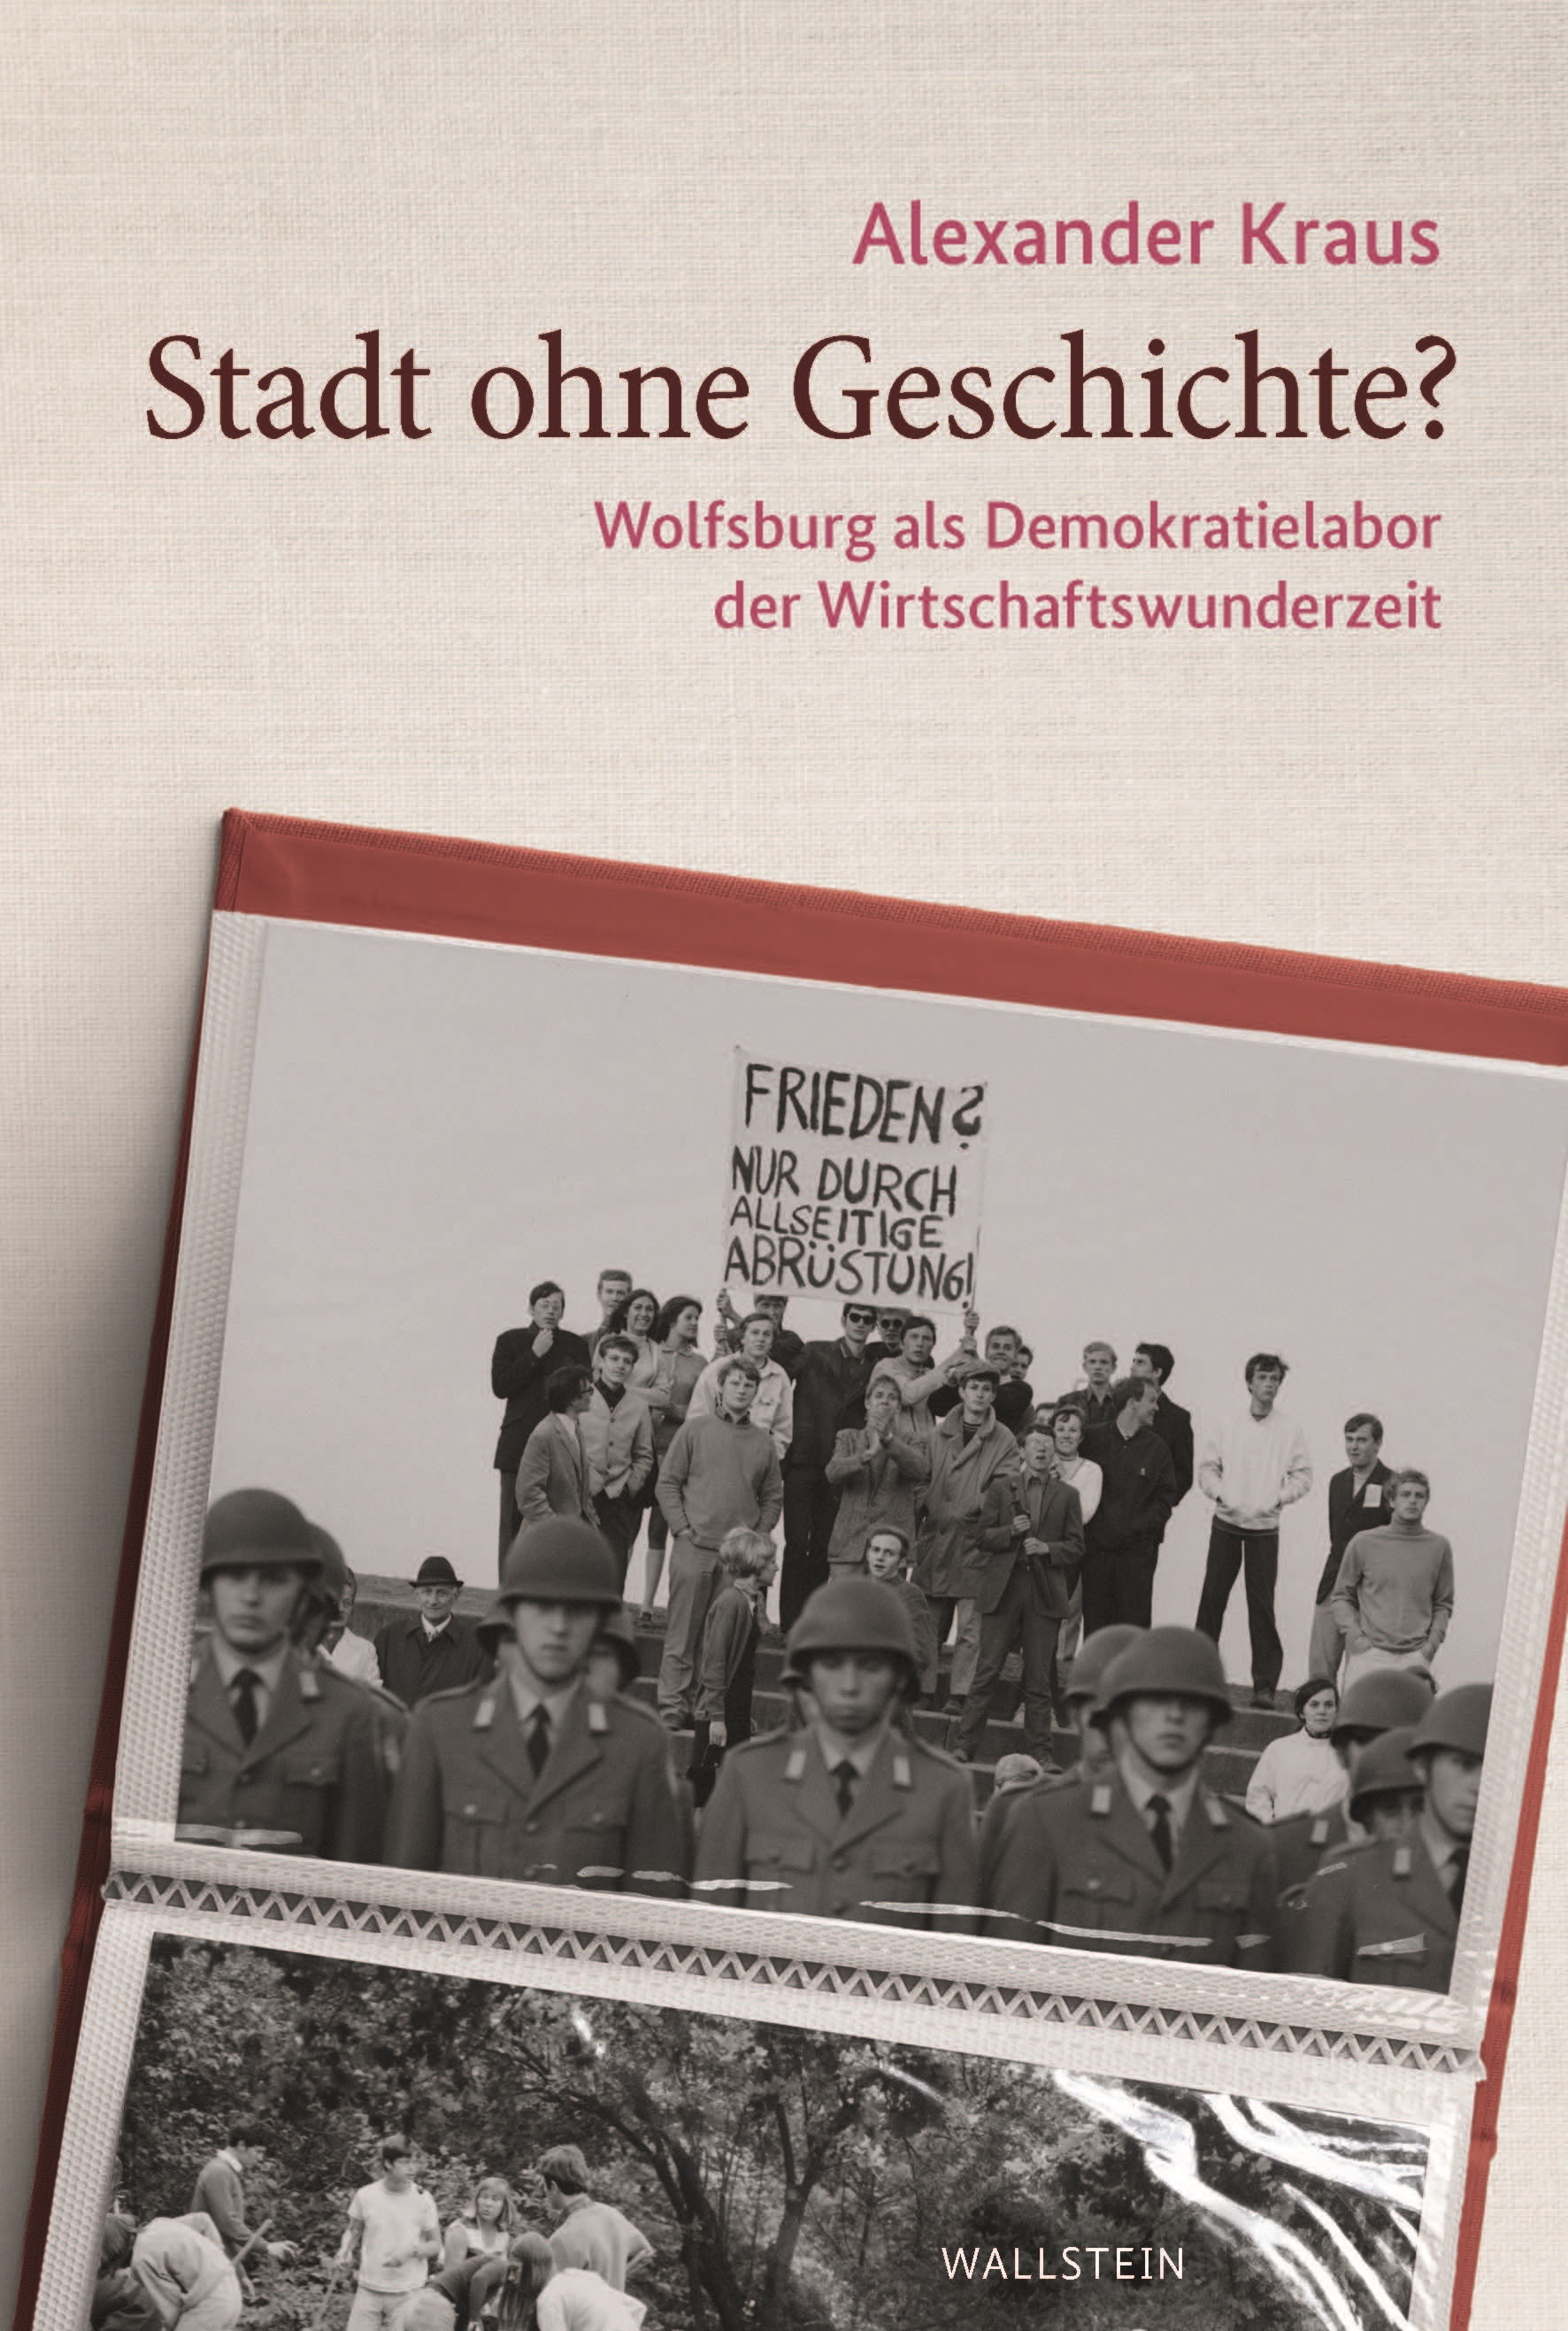 Title page of the book "Stadt ohne Geschichte? Wolfsburg as a democratic laboratory of the economic miracle era"